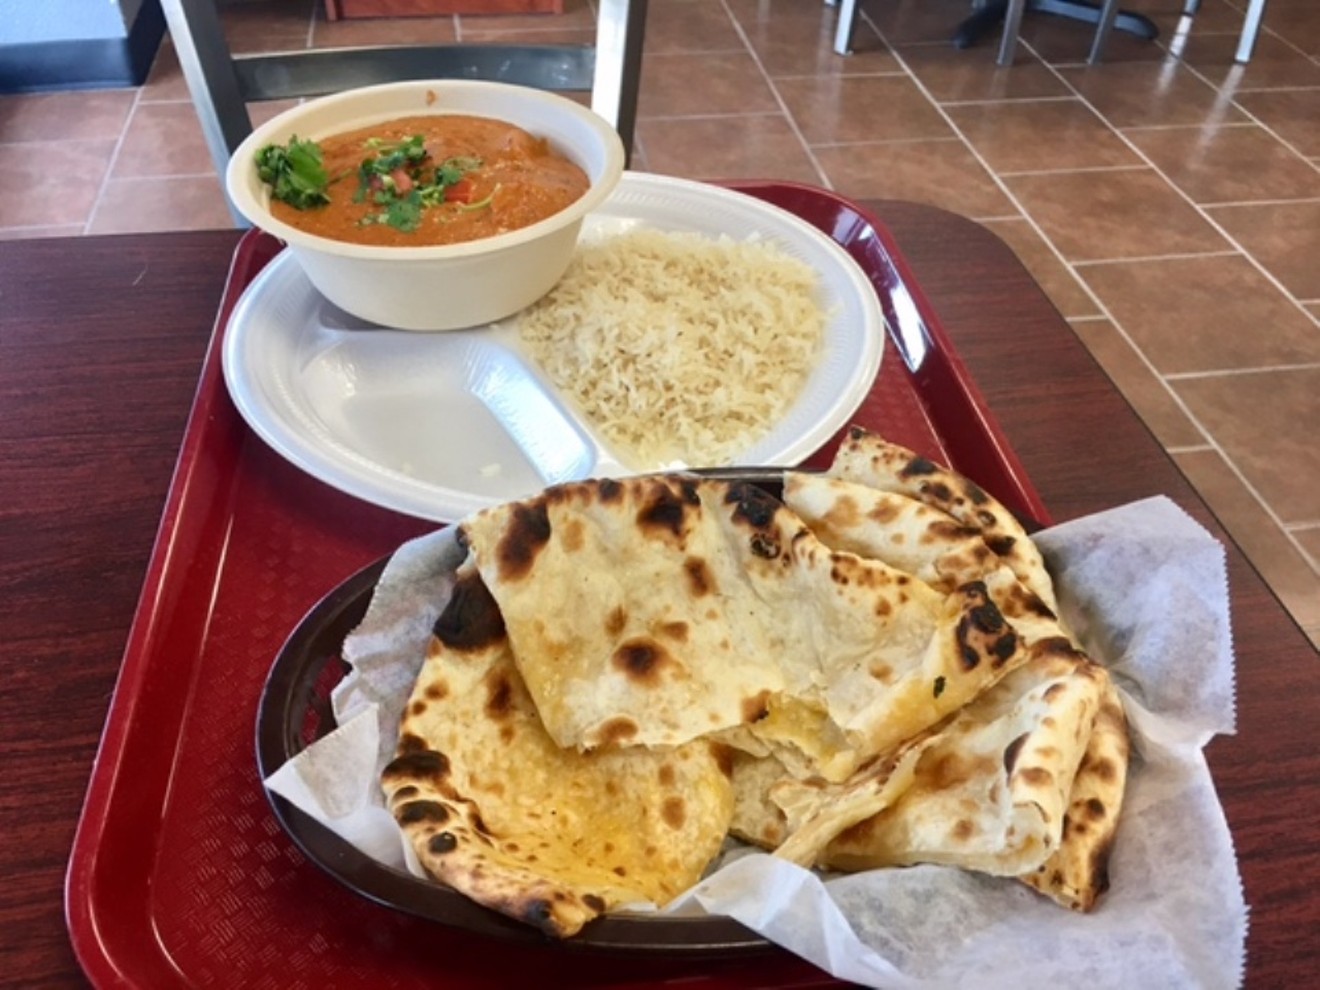 Butter chicken and housemade naan at Chutney, a new Indian restaurant on South Havana Street.